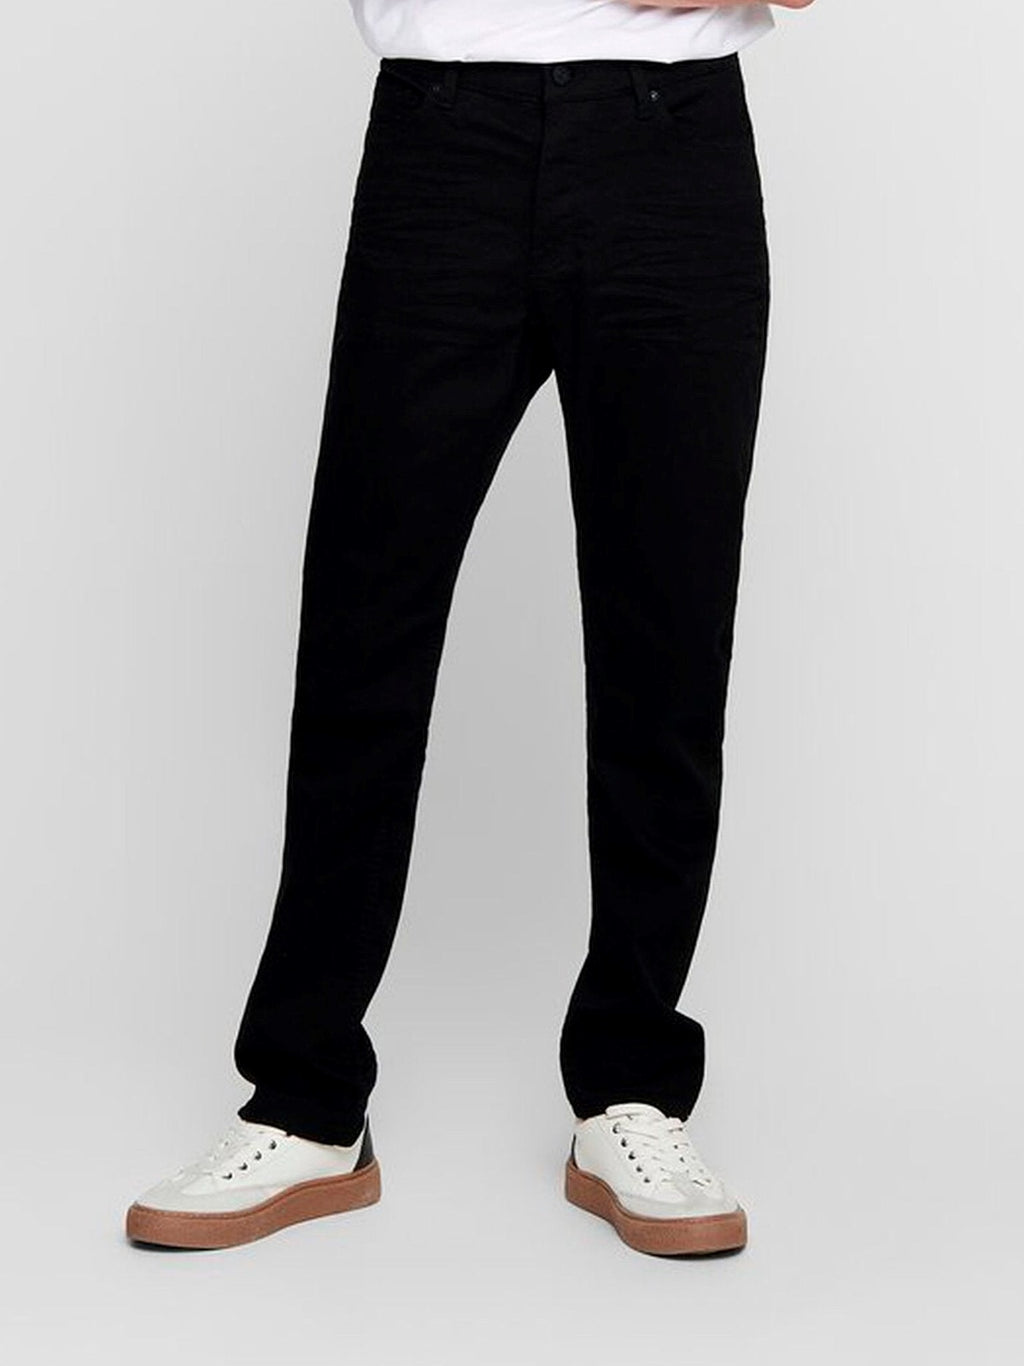 Mike Stretch Jeans - Black (Wide fit)